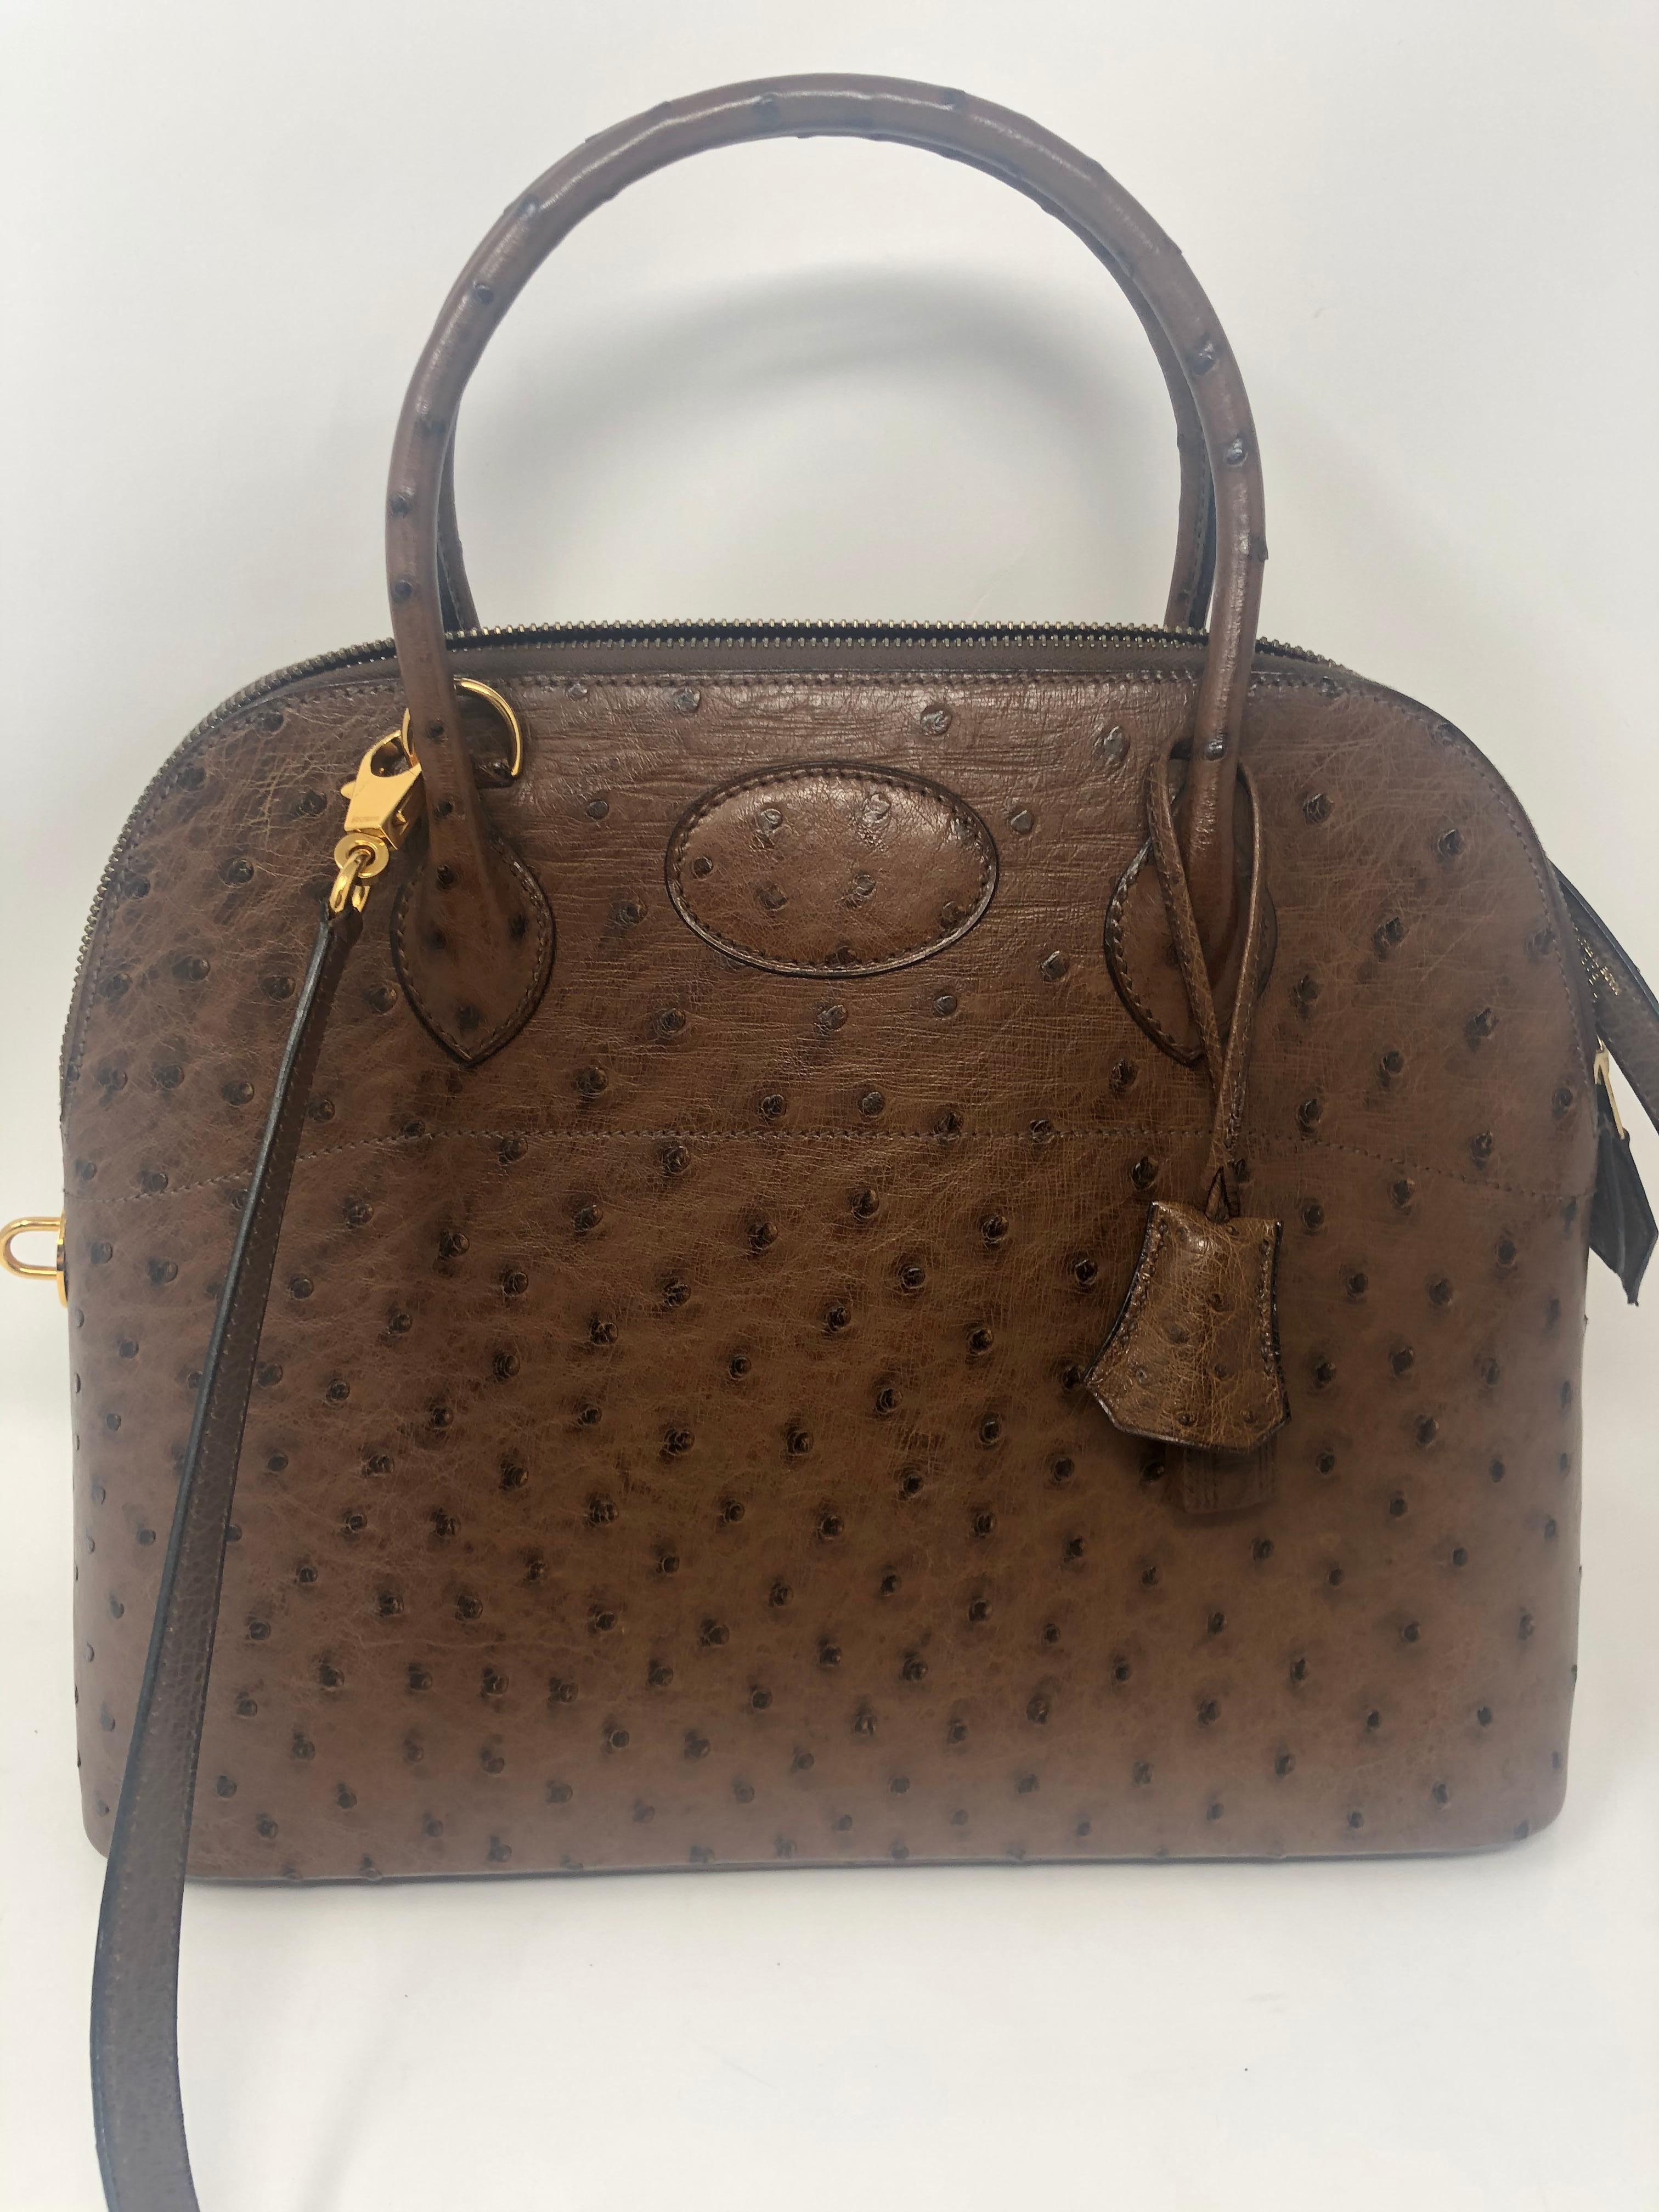 Hermes Bolide 31 Ostrich Leather Bag. Beautiful Ostrich leather in excellent conditon. Interior clean and unused. Cleaned and taken to Hermes for spa treatment. New owner will receive the receipt. Guaranteed authentic. 